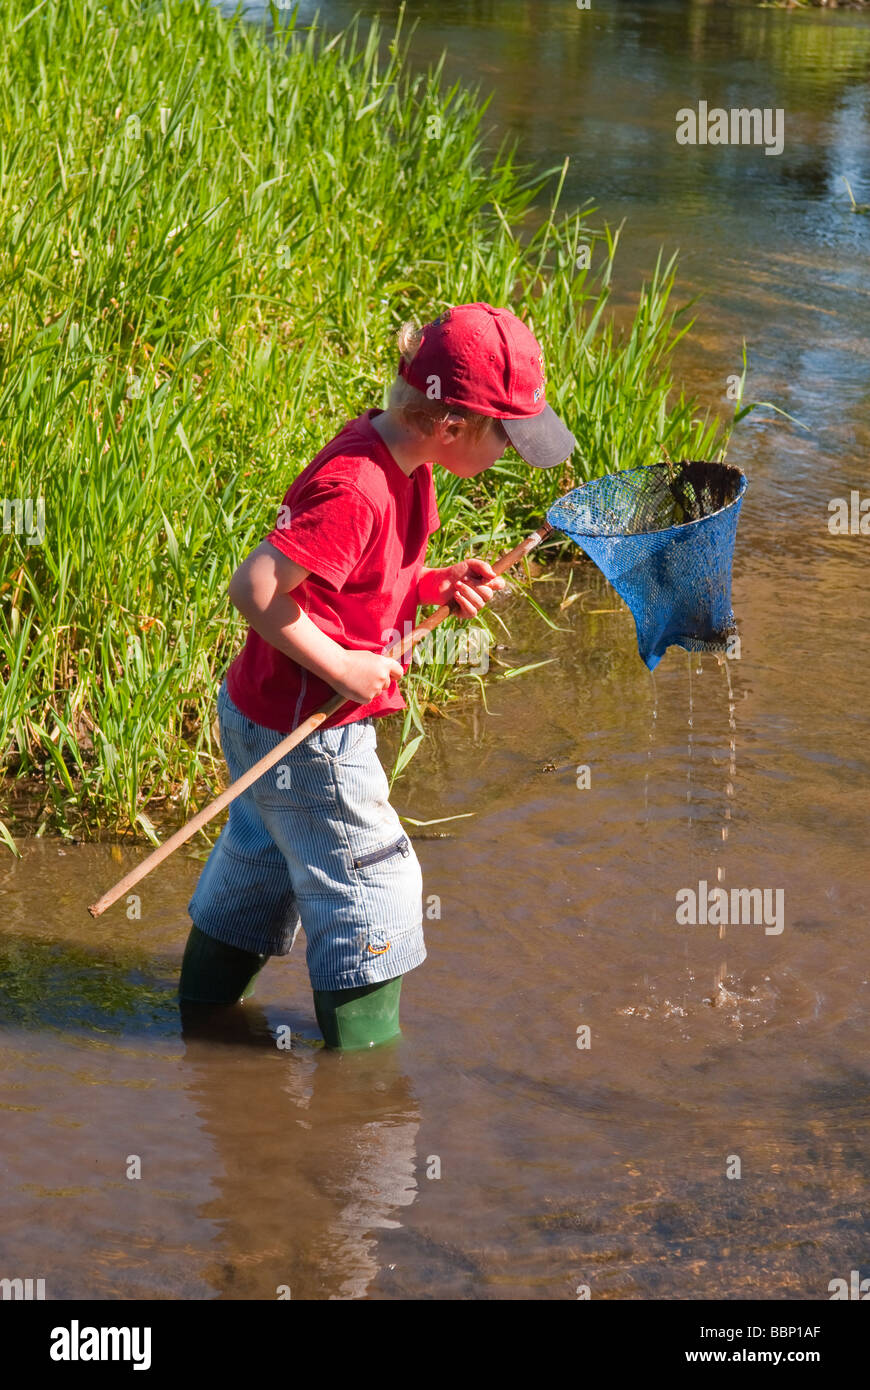 A five year old male boy child fishing with his fishing net trying